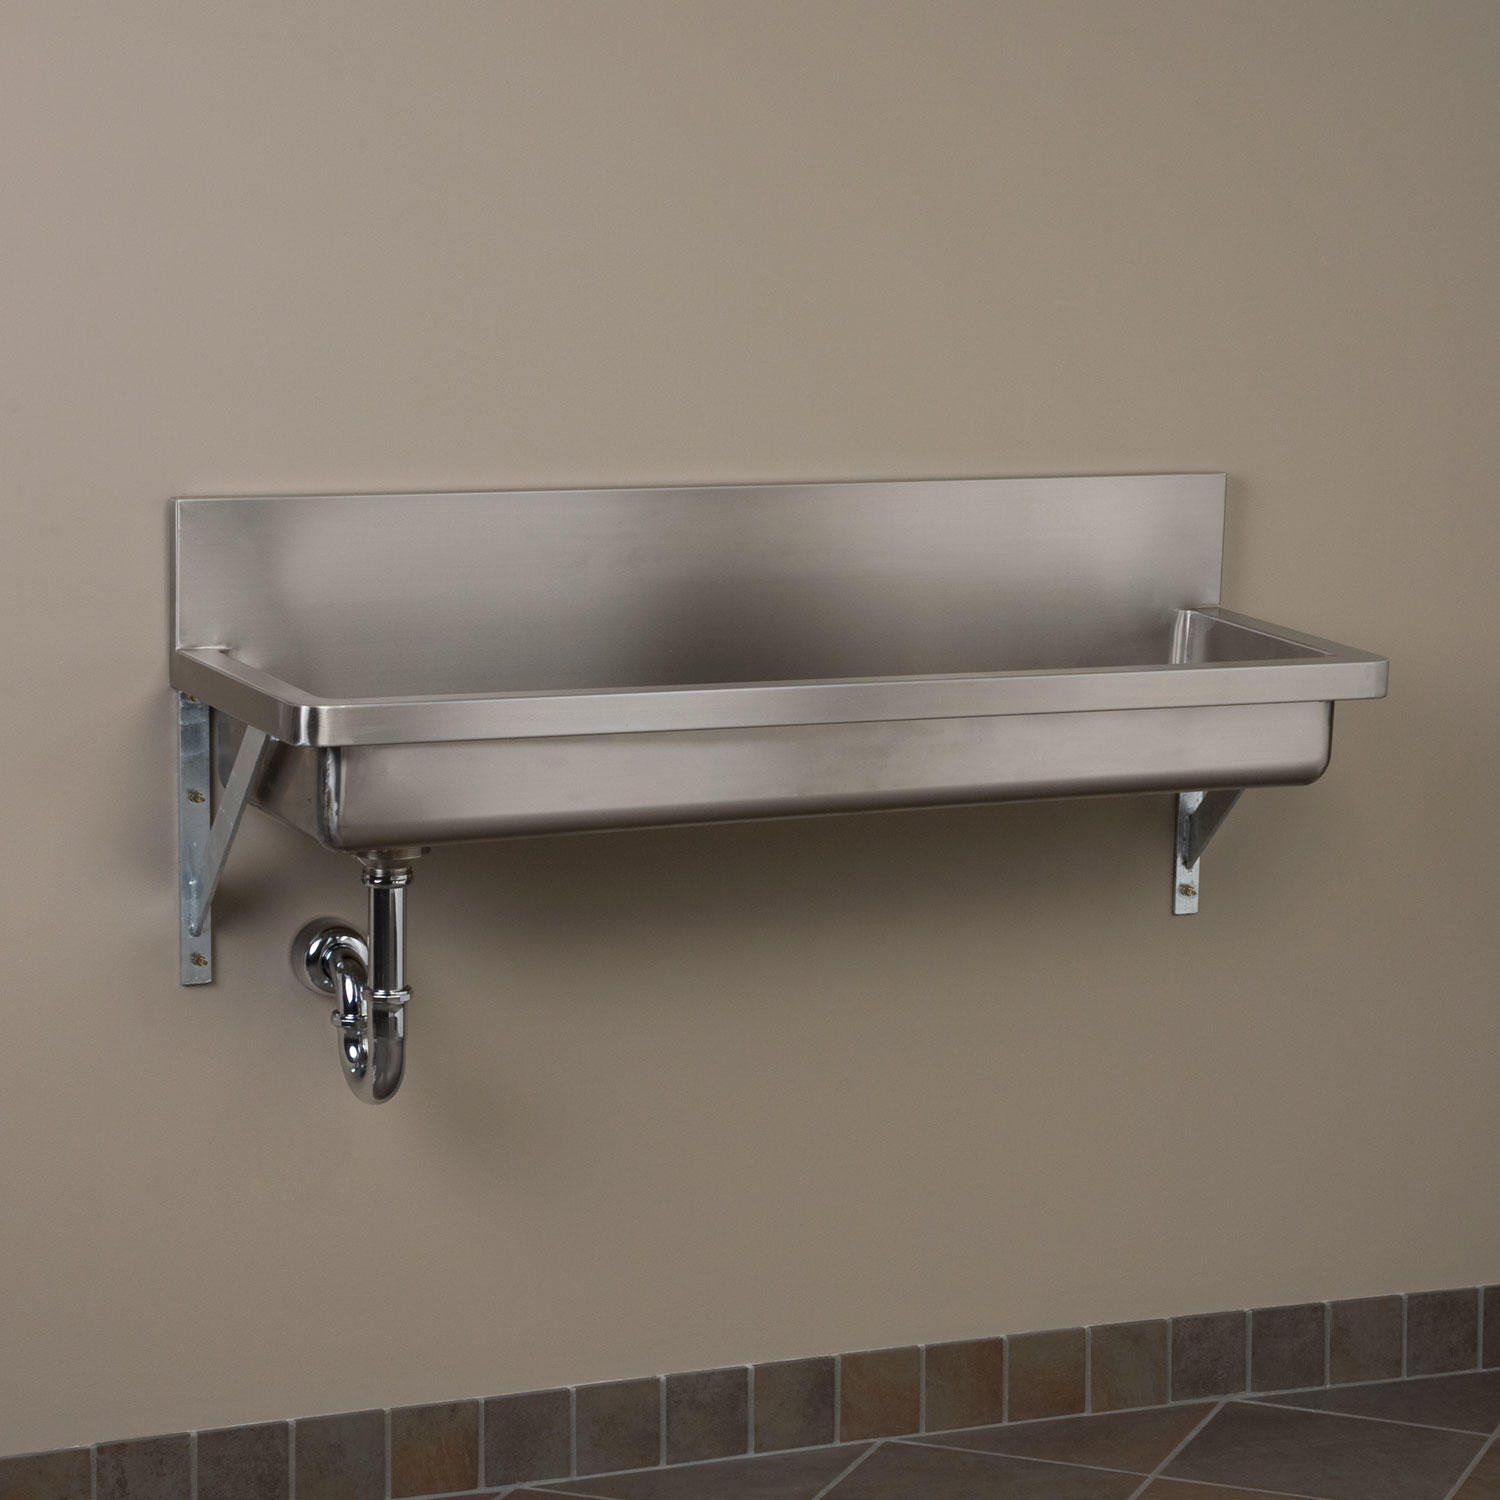 Wall Mounted Kitchen Sinks
 Stainless Steel Wall Mount mercial Sink Kitchen